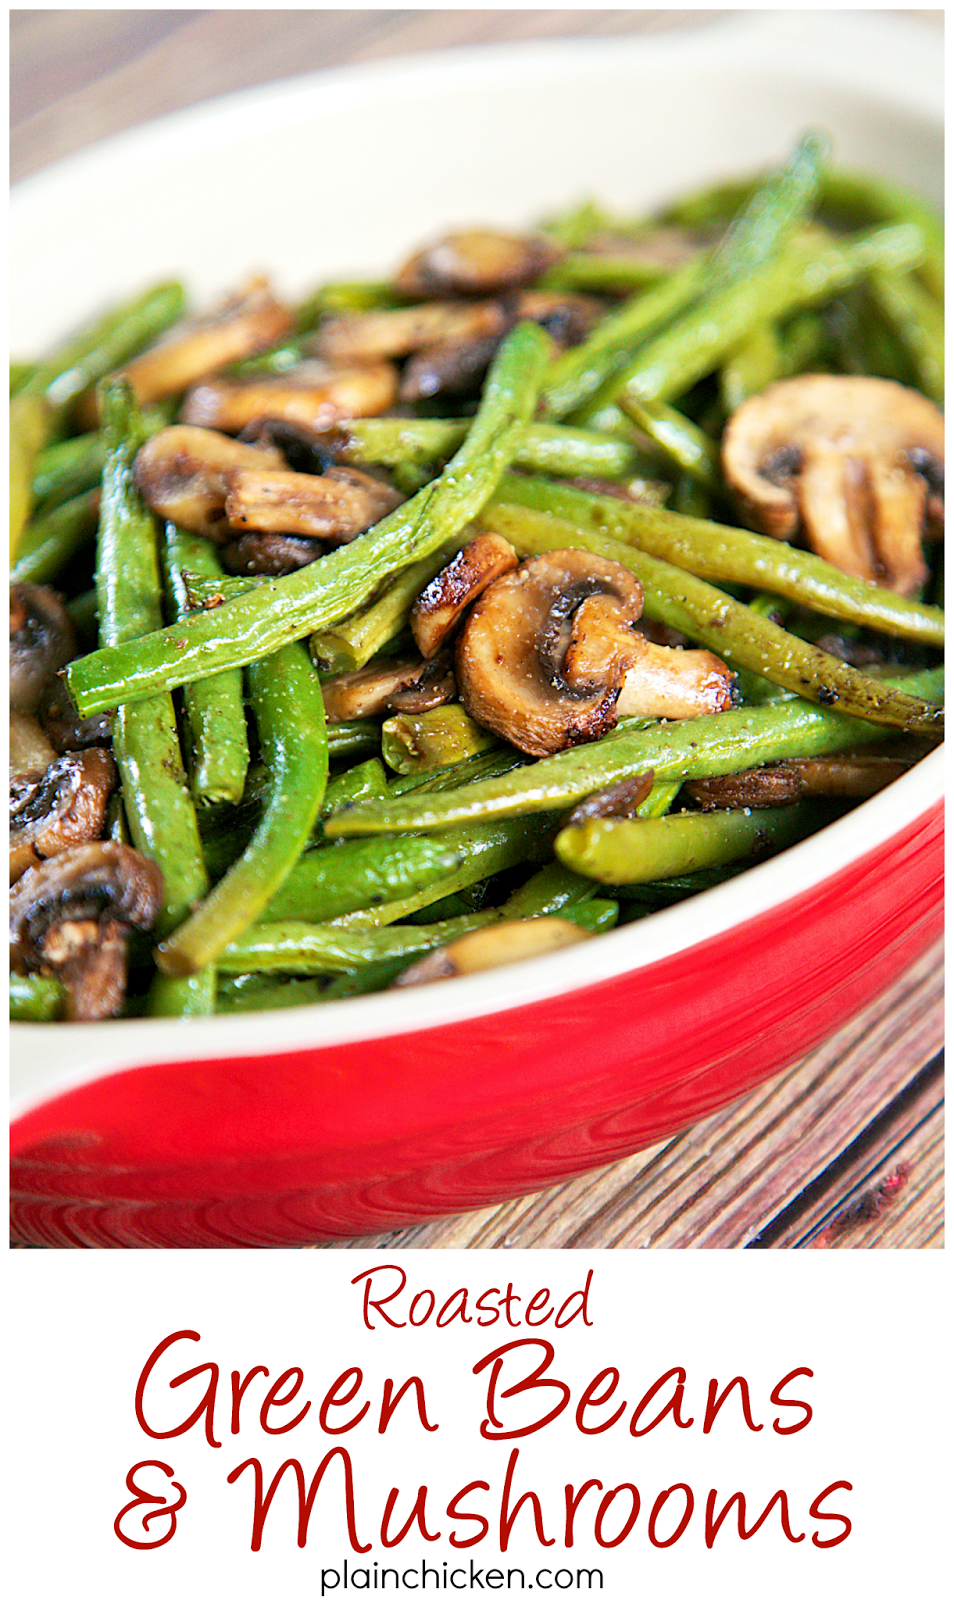 Roasted Green Beans and Mushrooms Recipe - fresh green beans and mushrooms tossed in olive oil, balsamic, garlic salt, pepper and baked. SO simple and SOOO delicious! Ready in about 20 minutes. -   23 fresh mushroom recipes
 ideas